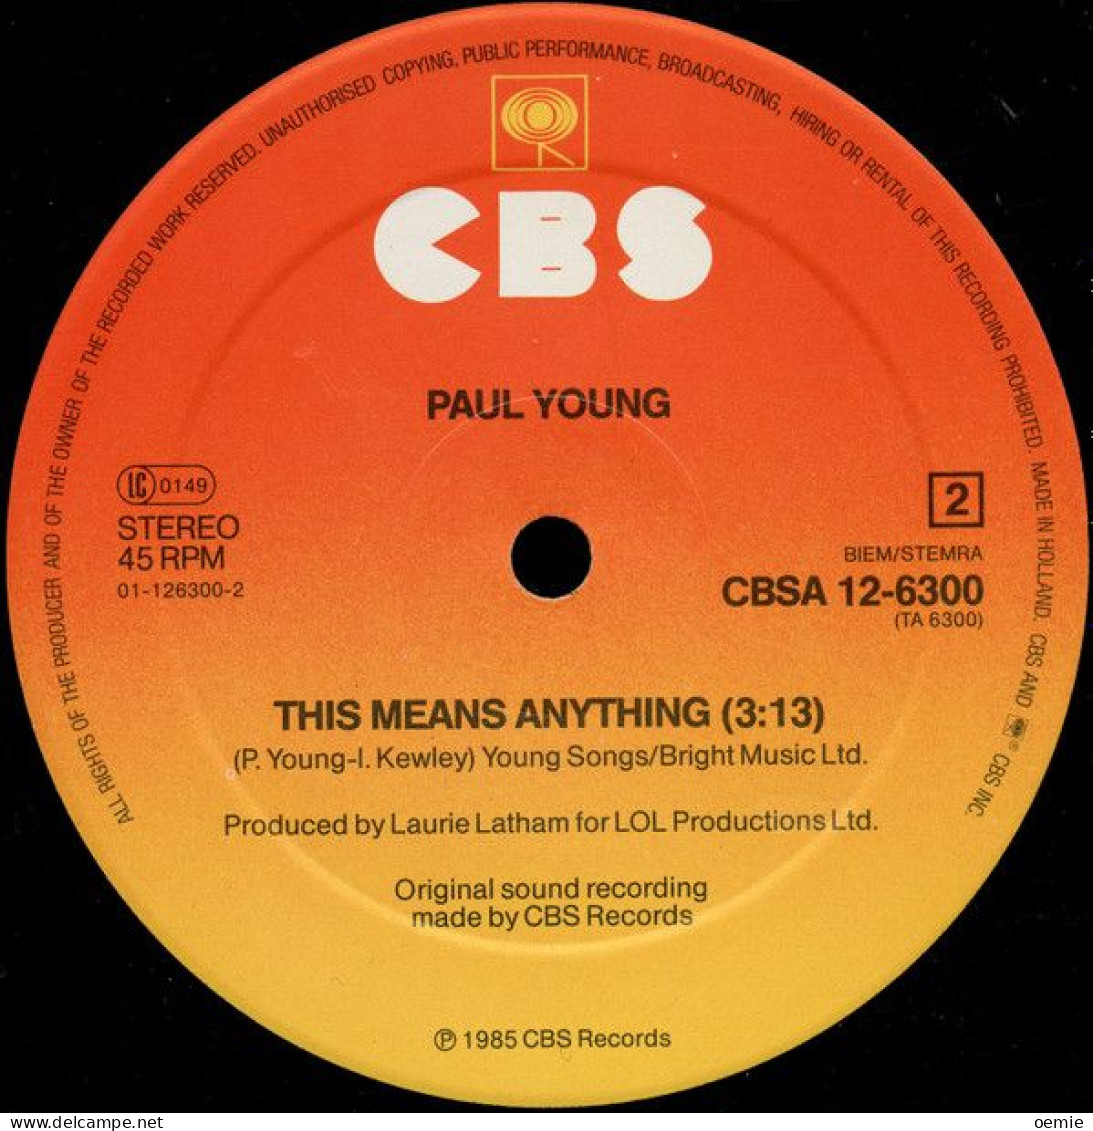 PAUL YOUNG EVERY YOU GO AWAY - 45 T - Maxi-Single